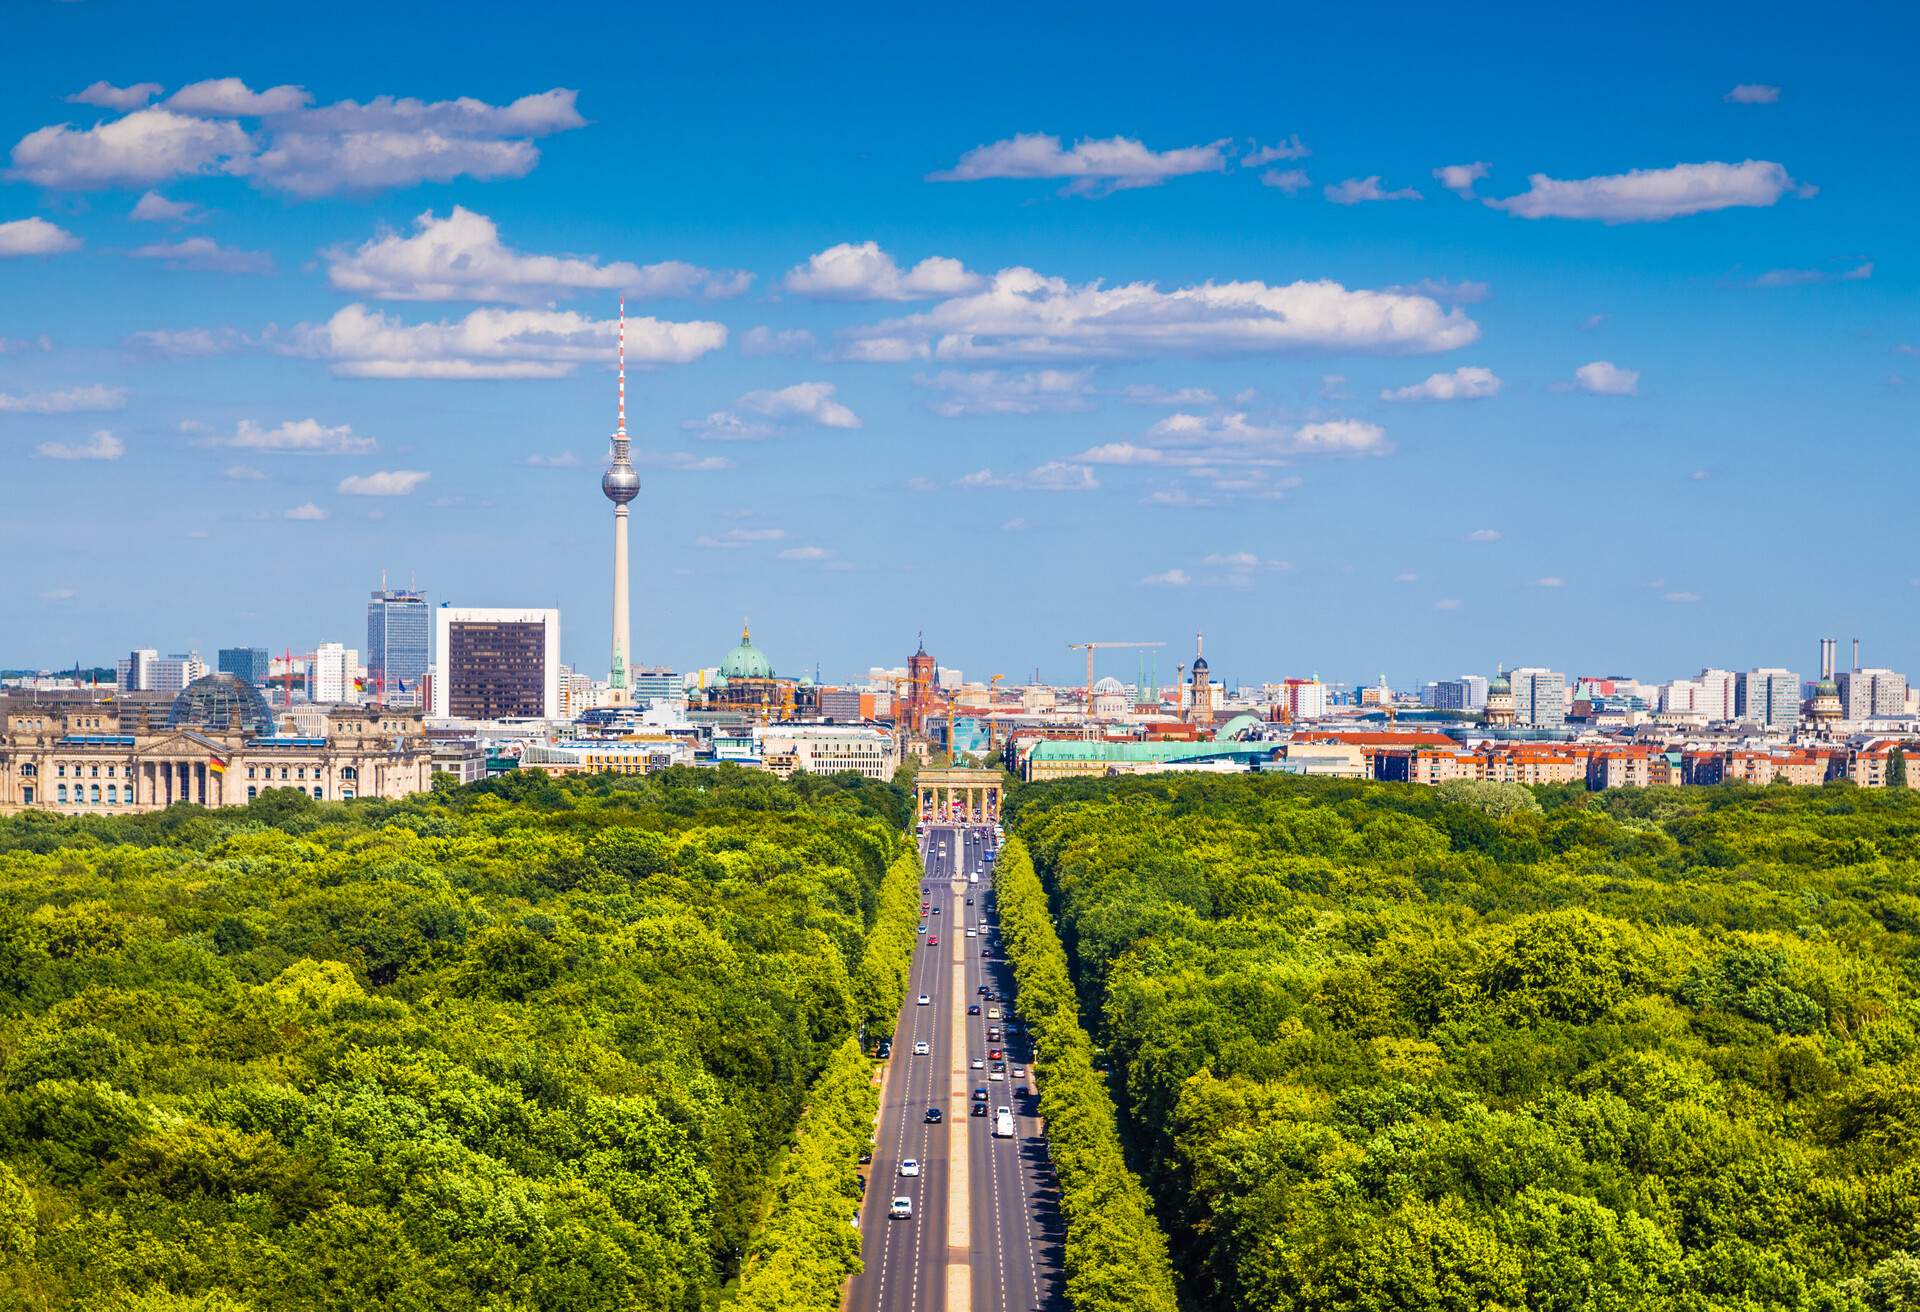 A highway surrounded by lush forest that leads to the city's metropolitan scenery, with a prominent TV tower visible in the distance.